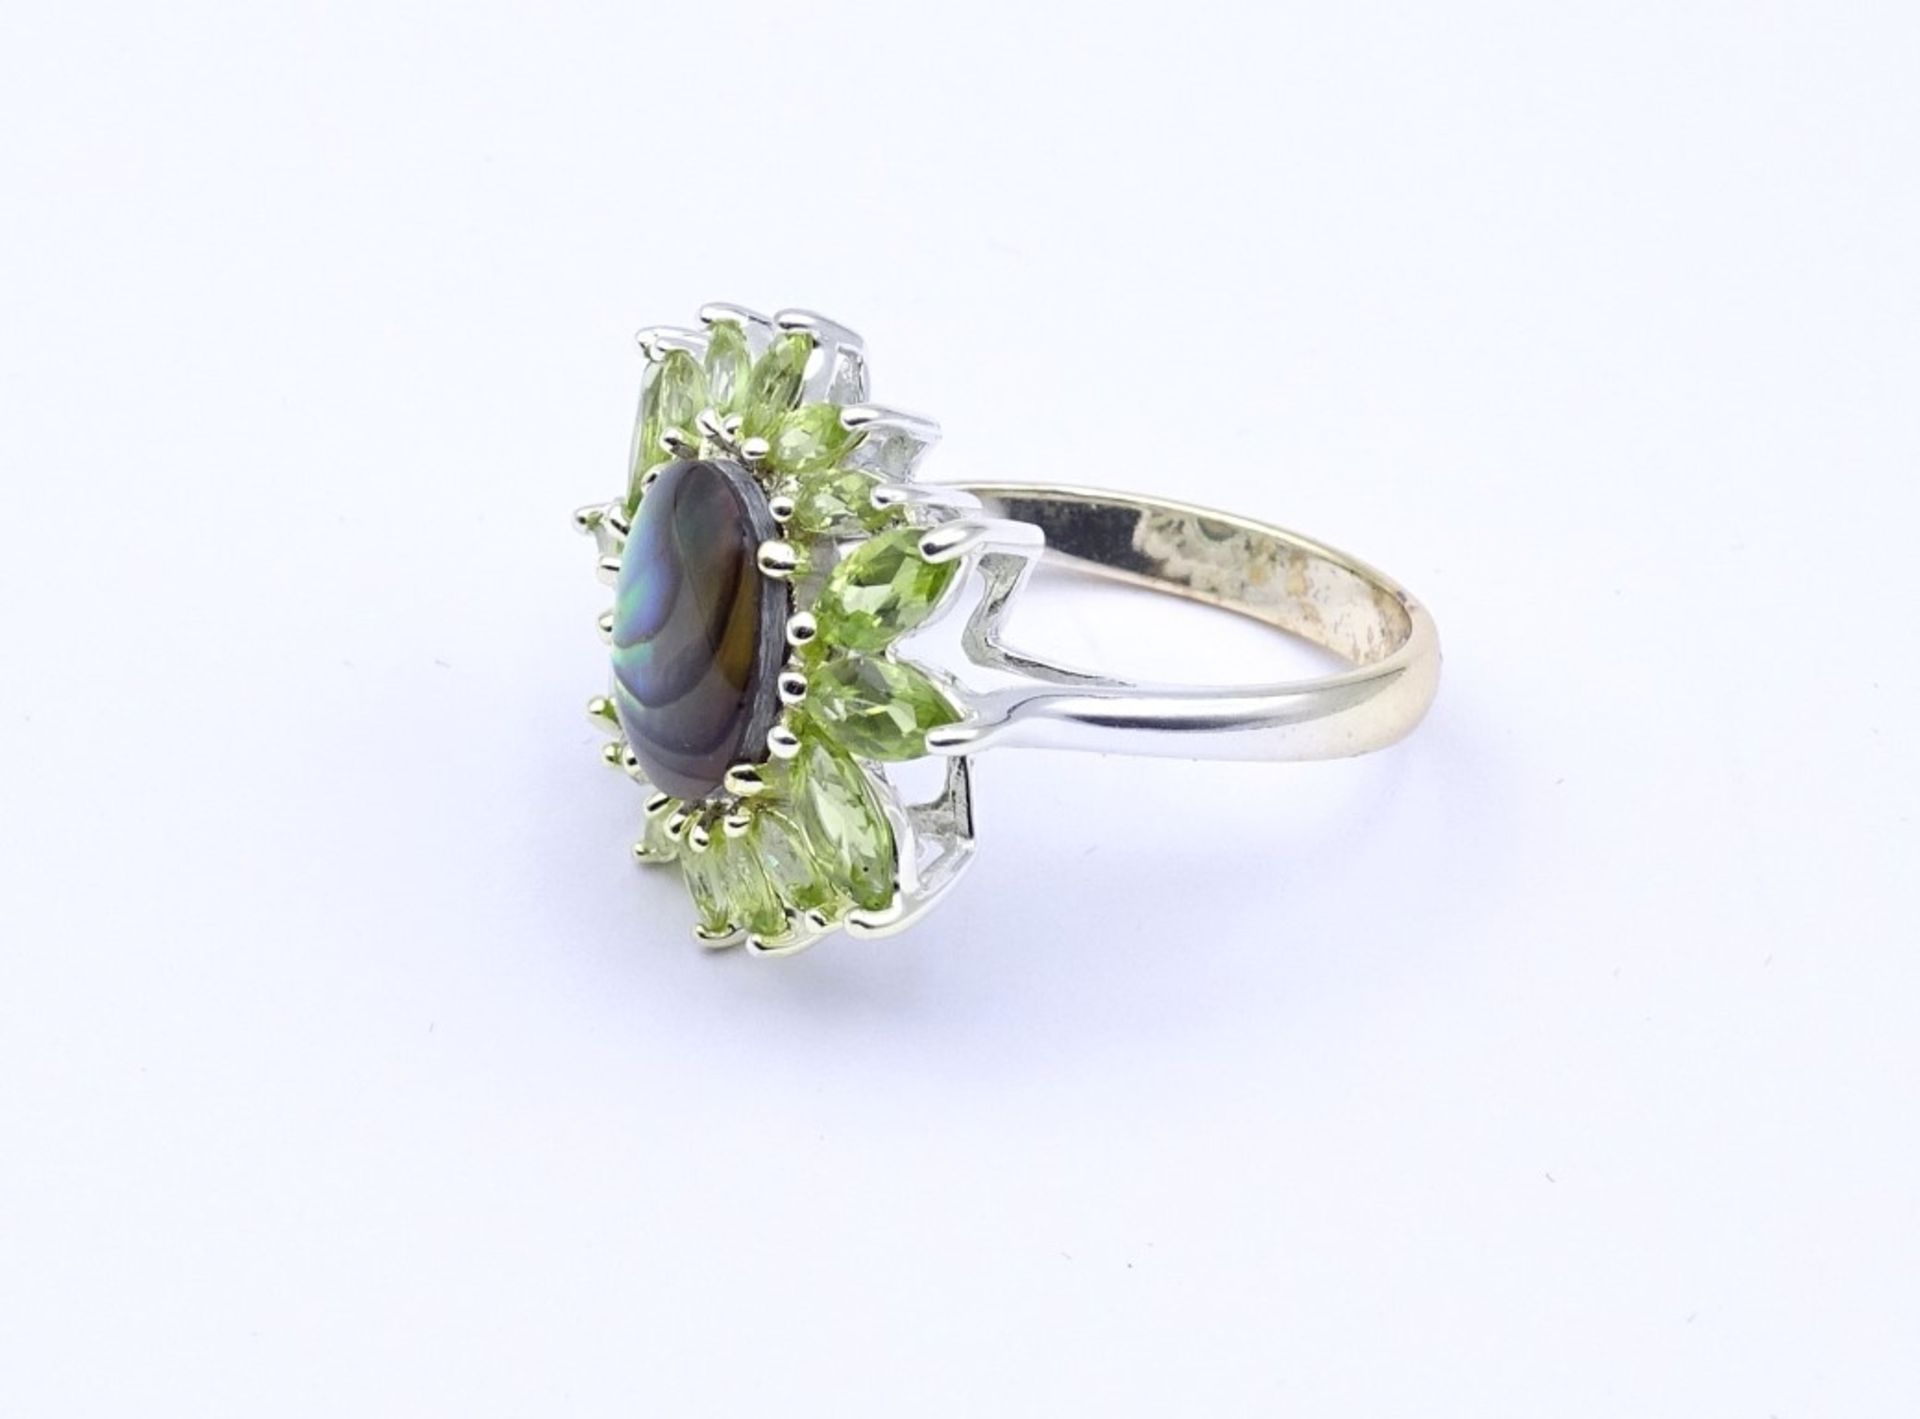 Silber Ring mit Peridots und Perlmutt,Sterling Silber 925/000,5,6gr., RG 63 - Image 3 of 3